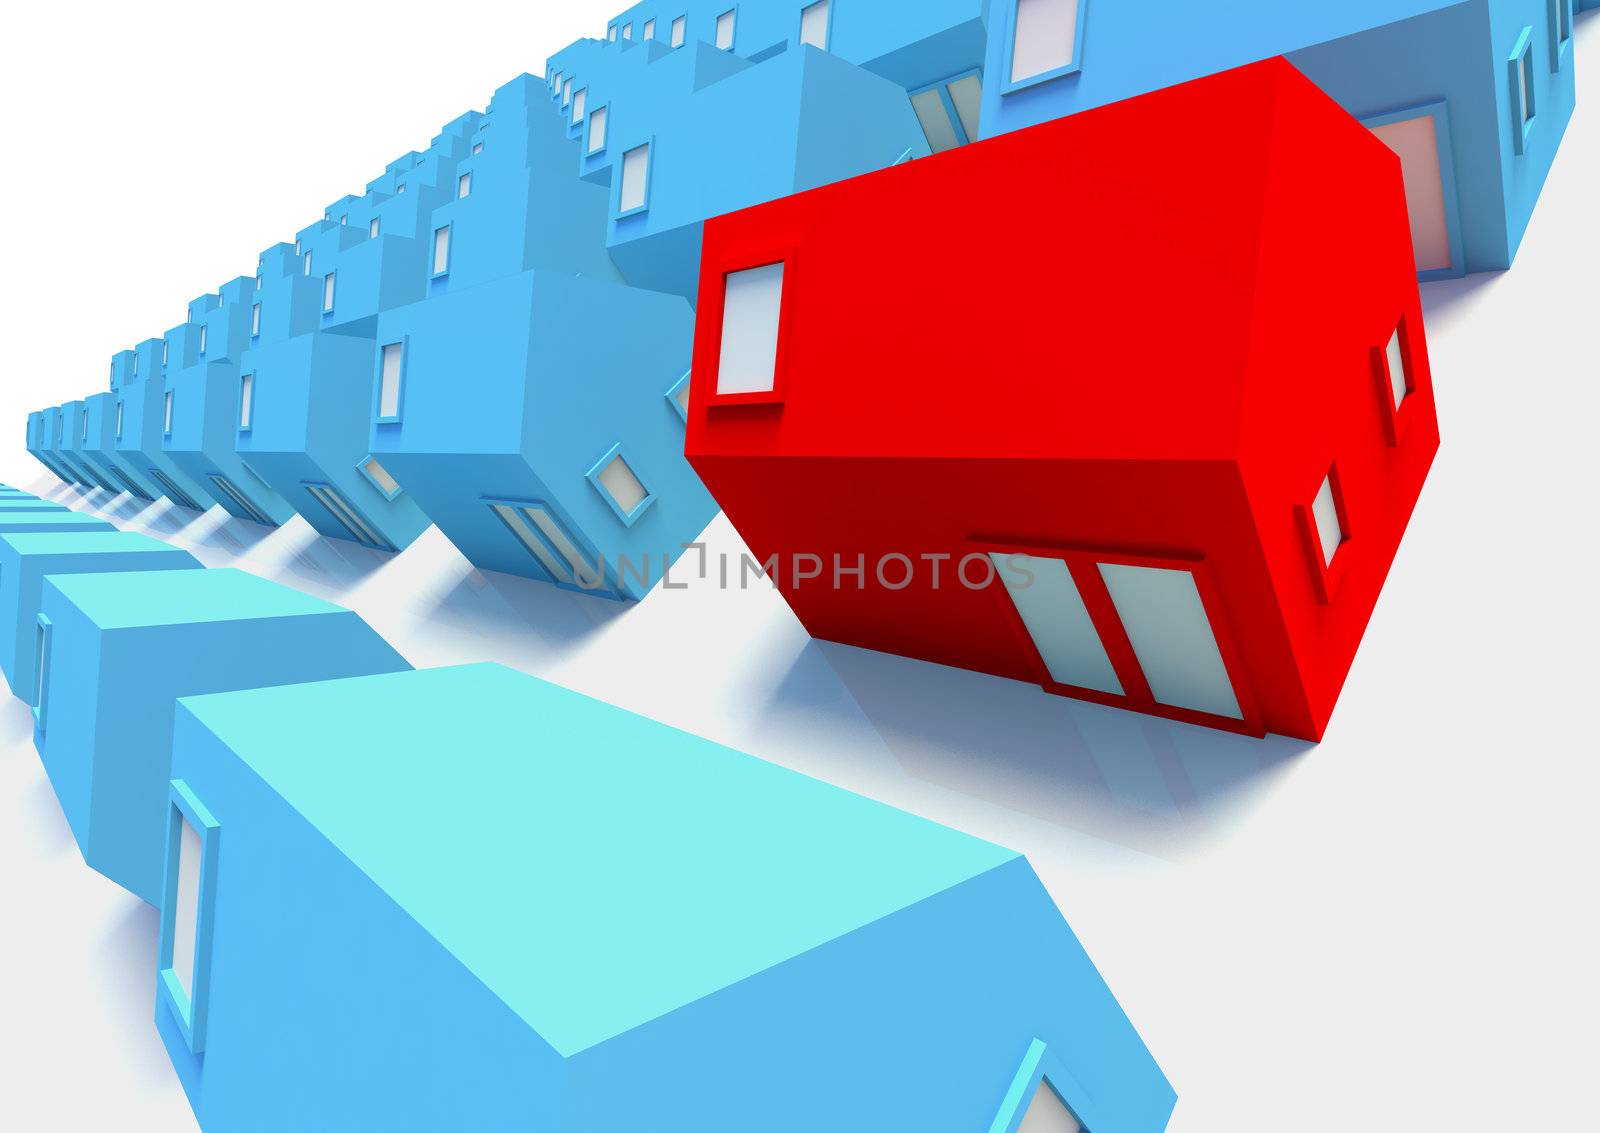 The Red House amongst The Blue,a picture for real-estate business